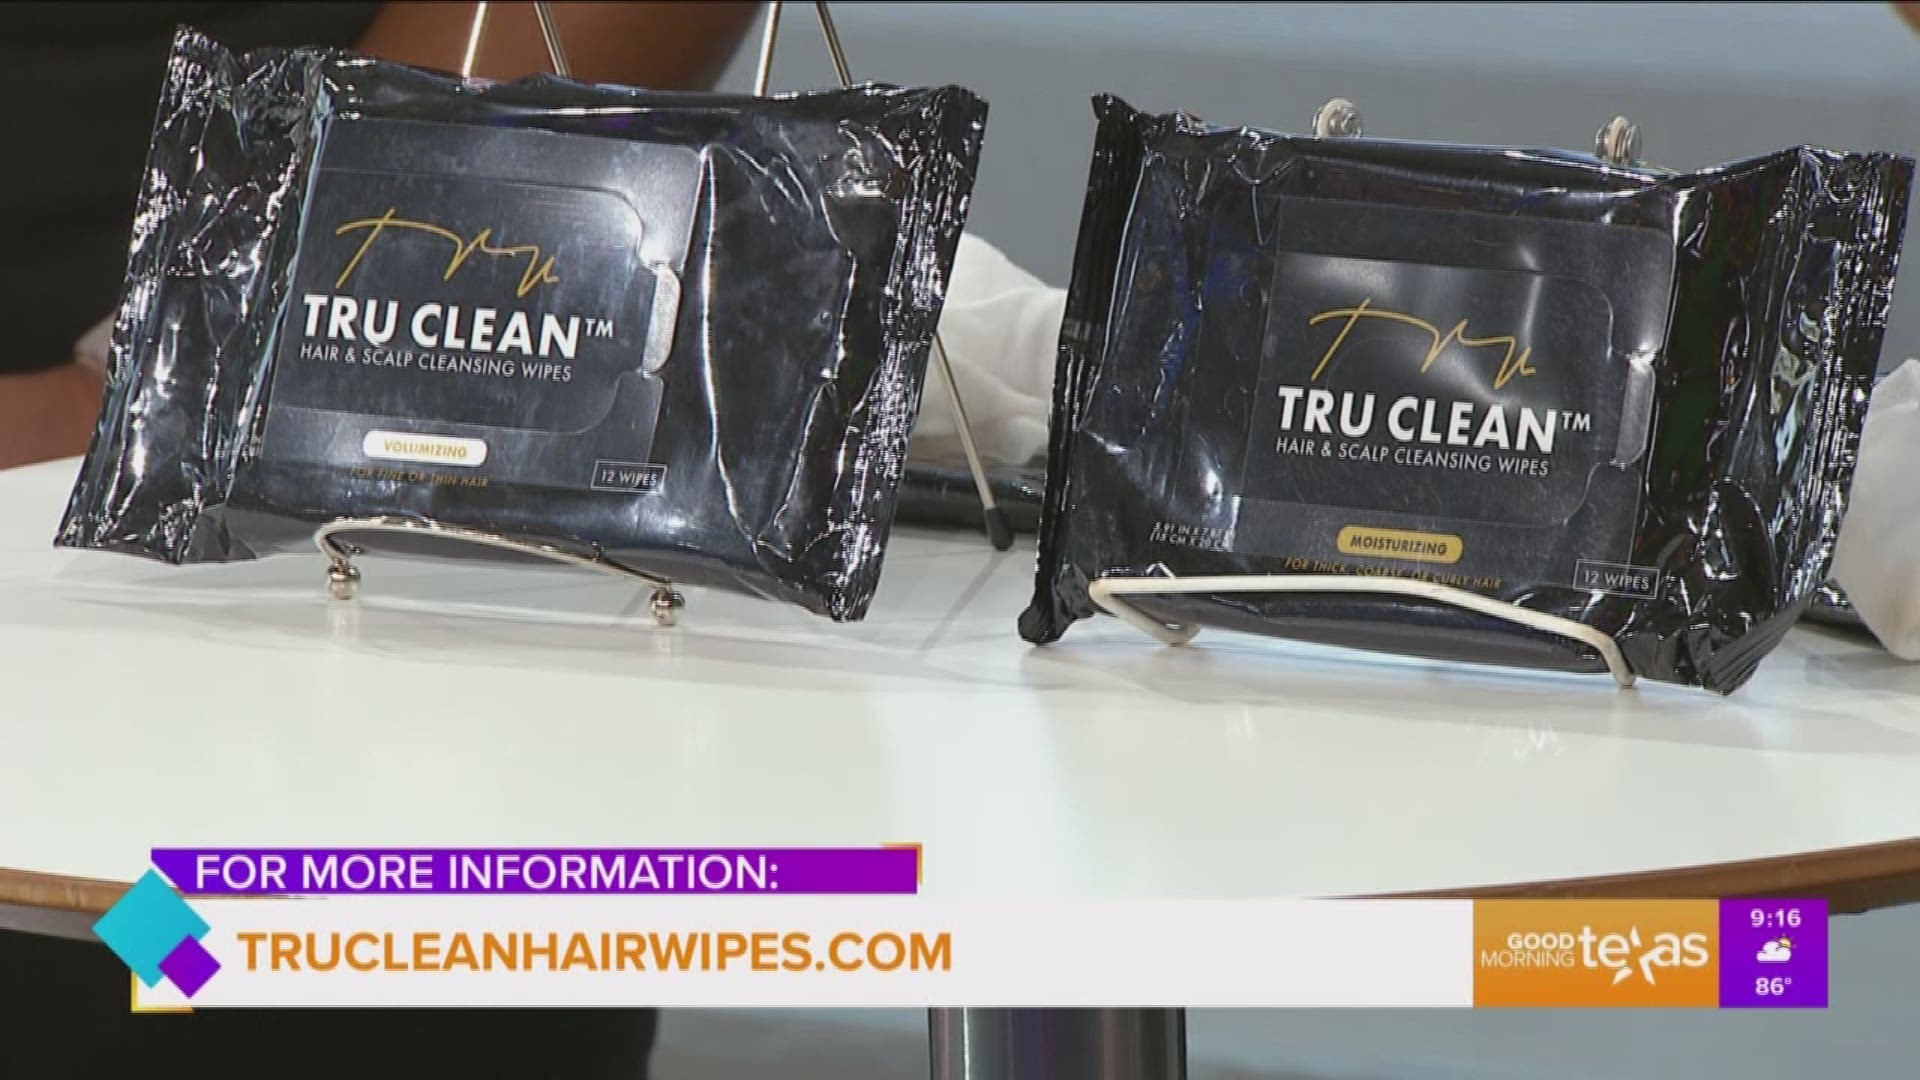 Go to trucleanhairwipes.com for more information.